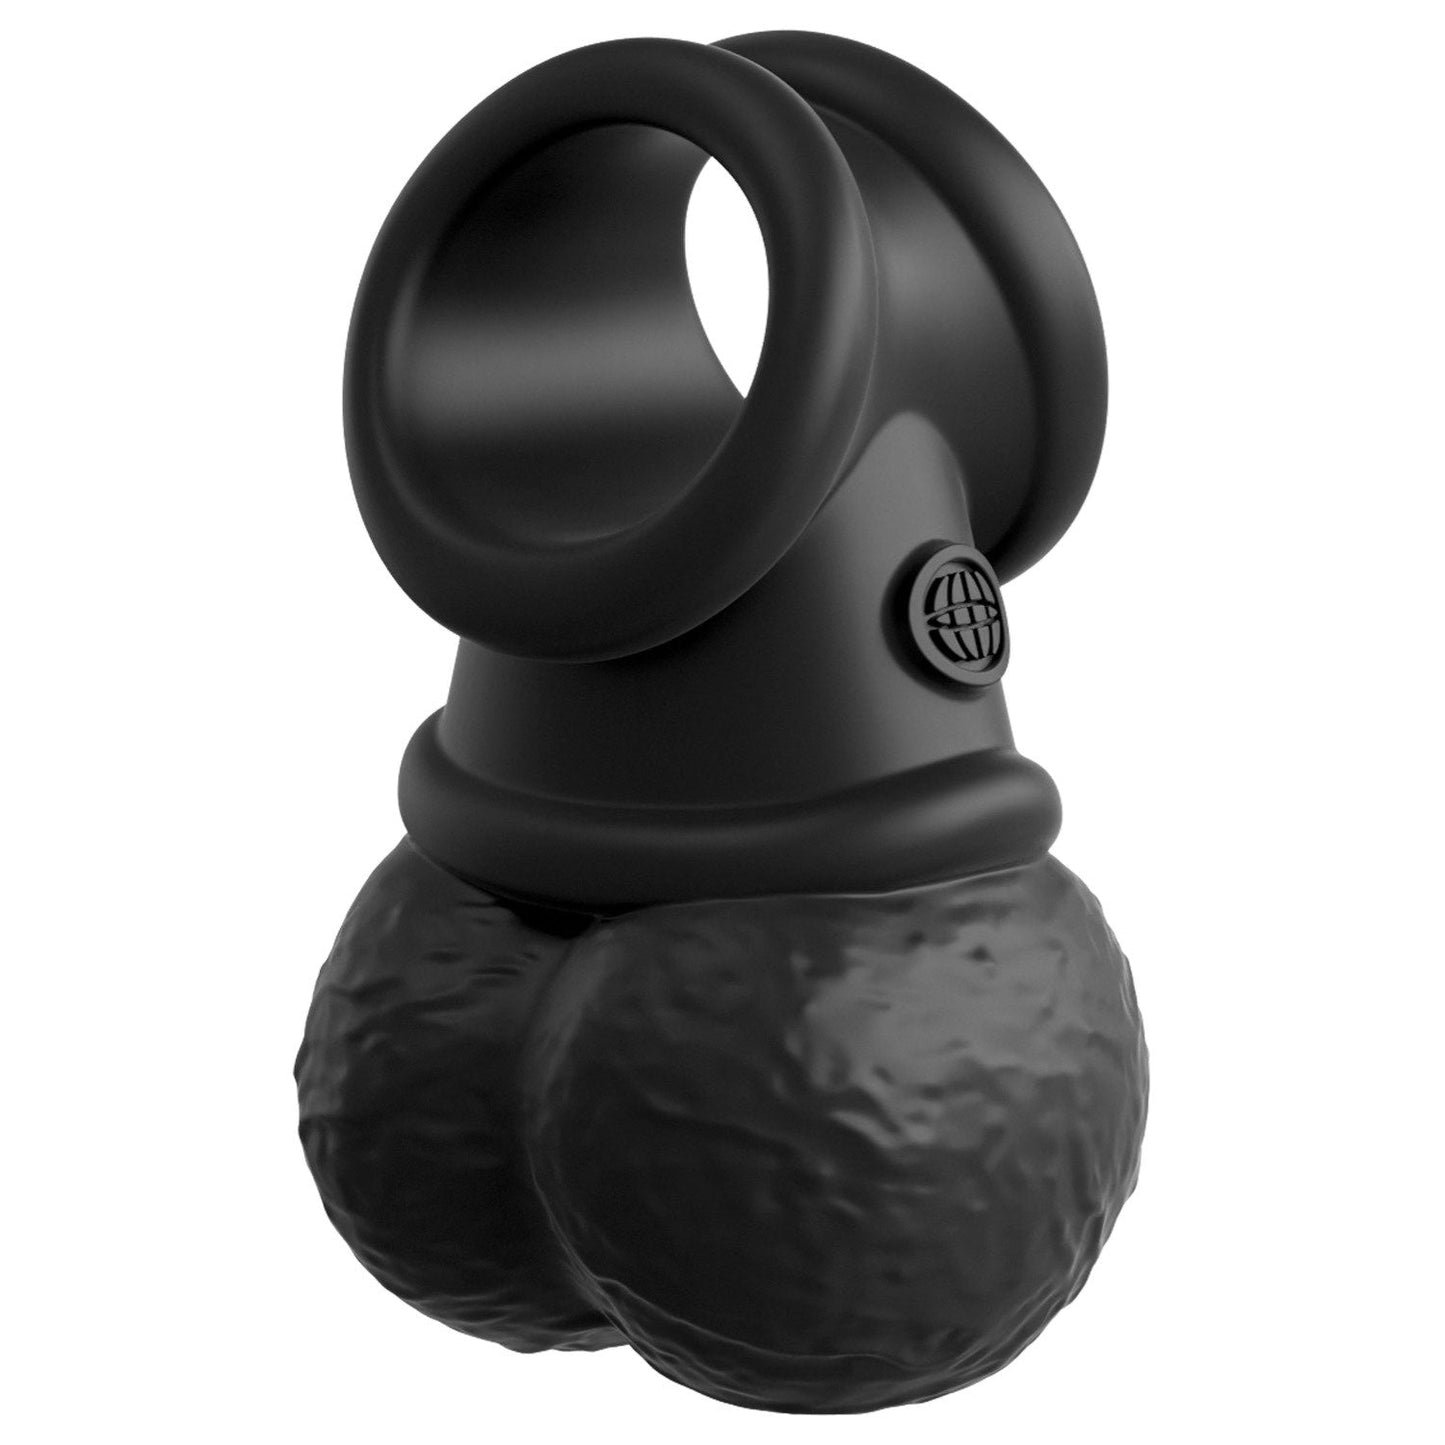 Elite The Crown Jewels Vibrating Silicone Balls - Black USB Rechargeable Vibrating Cock Ring